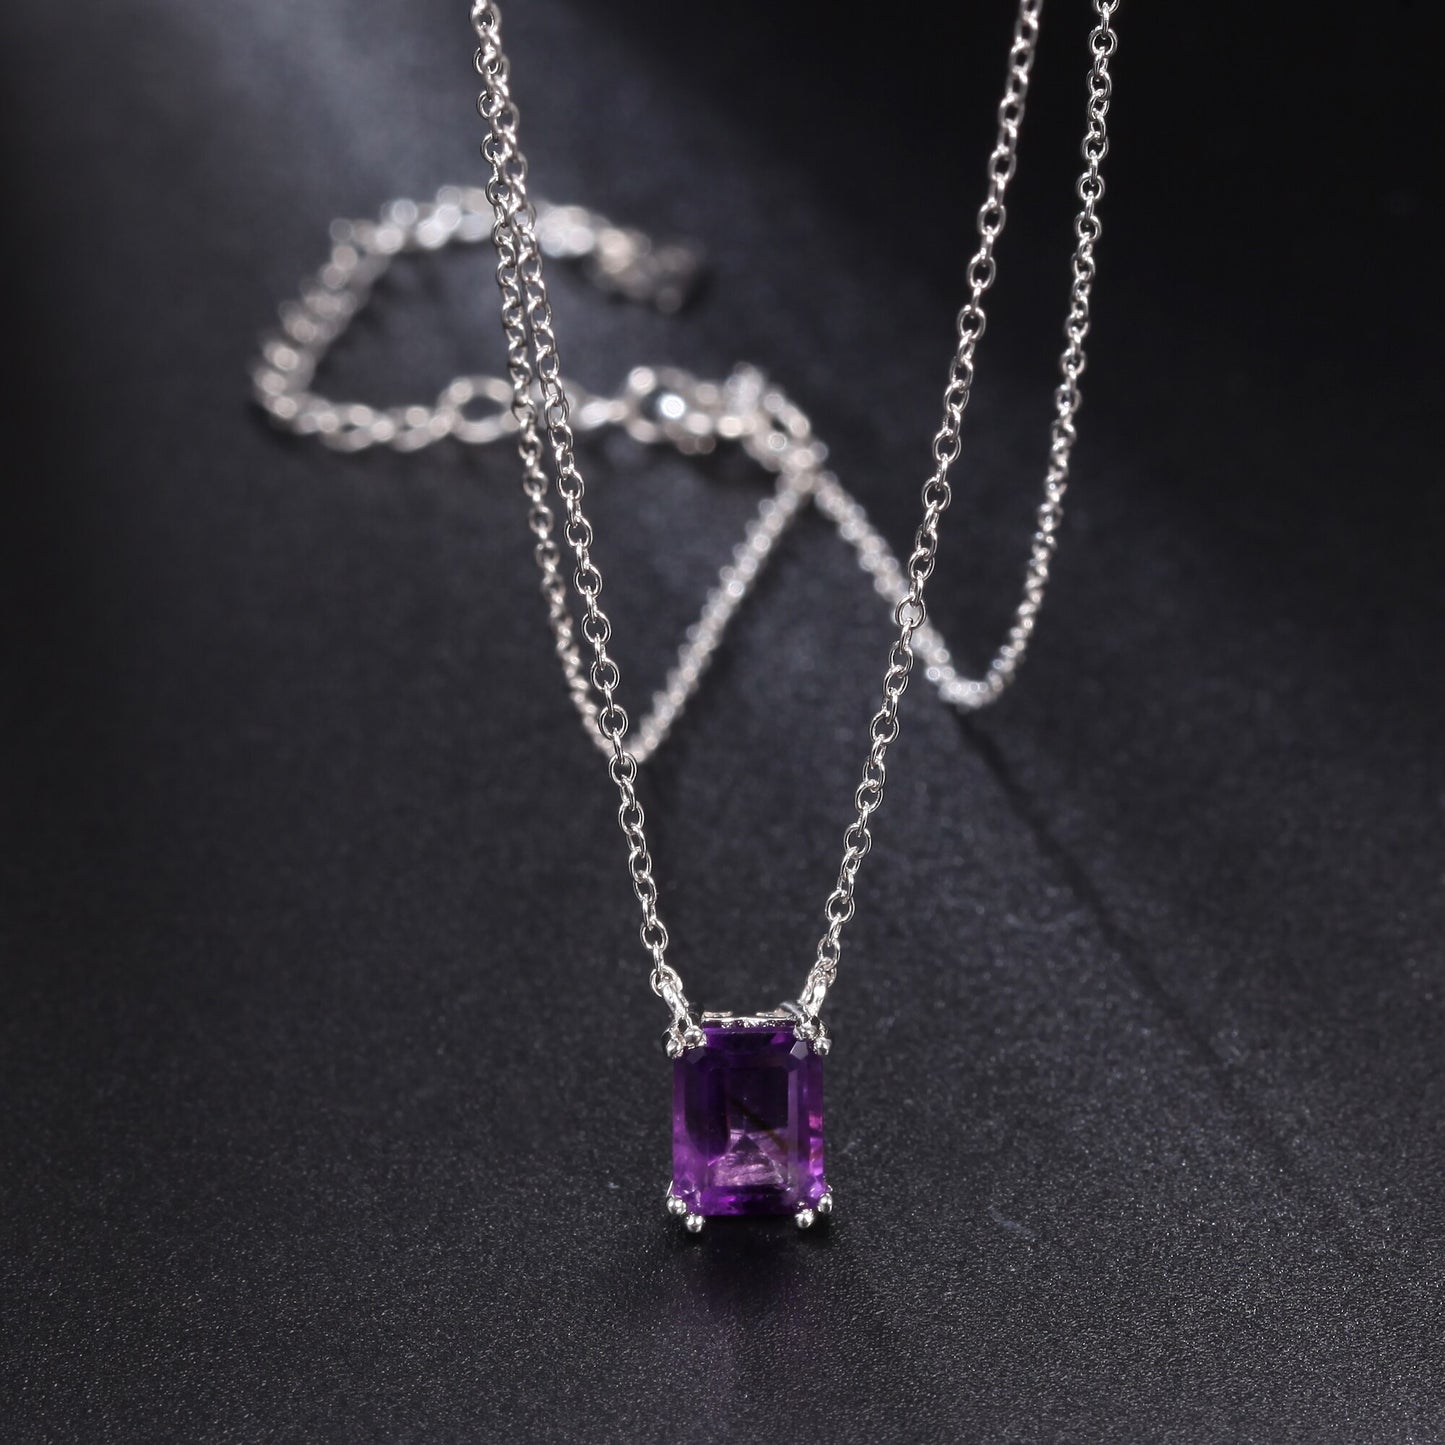 Hanging Natural Square Amethyst 925 Sterling Silver Necklace